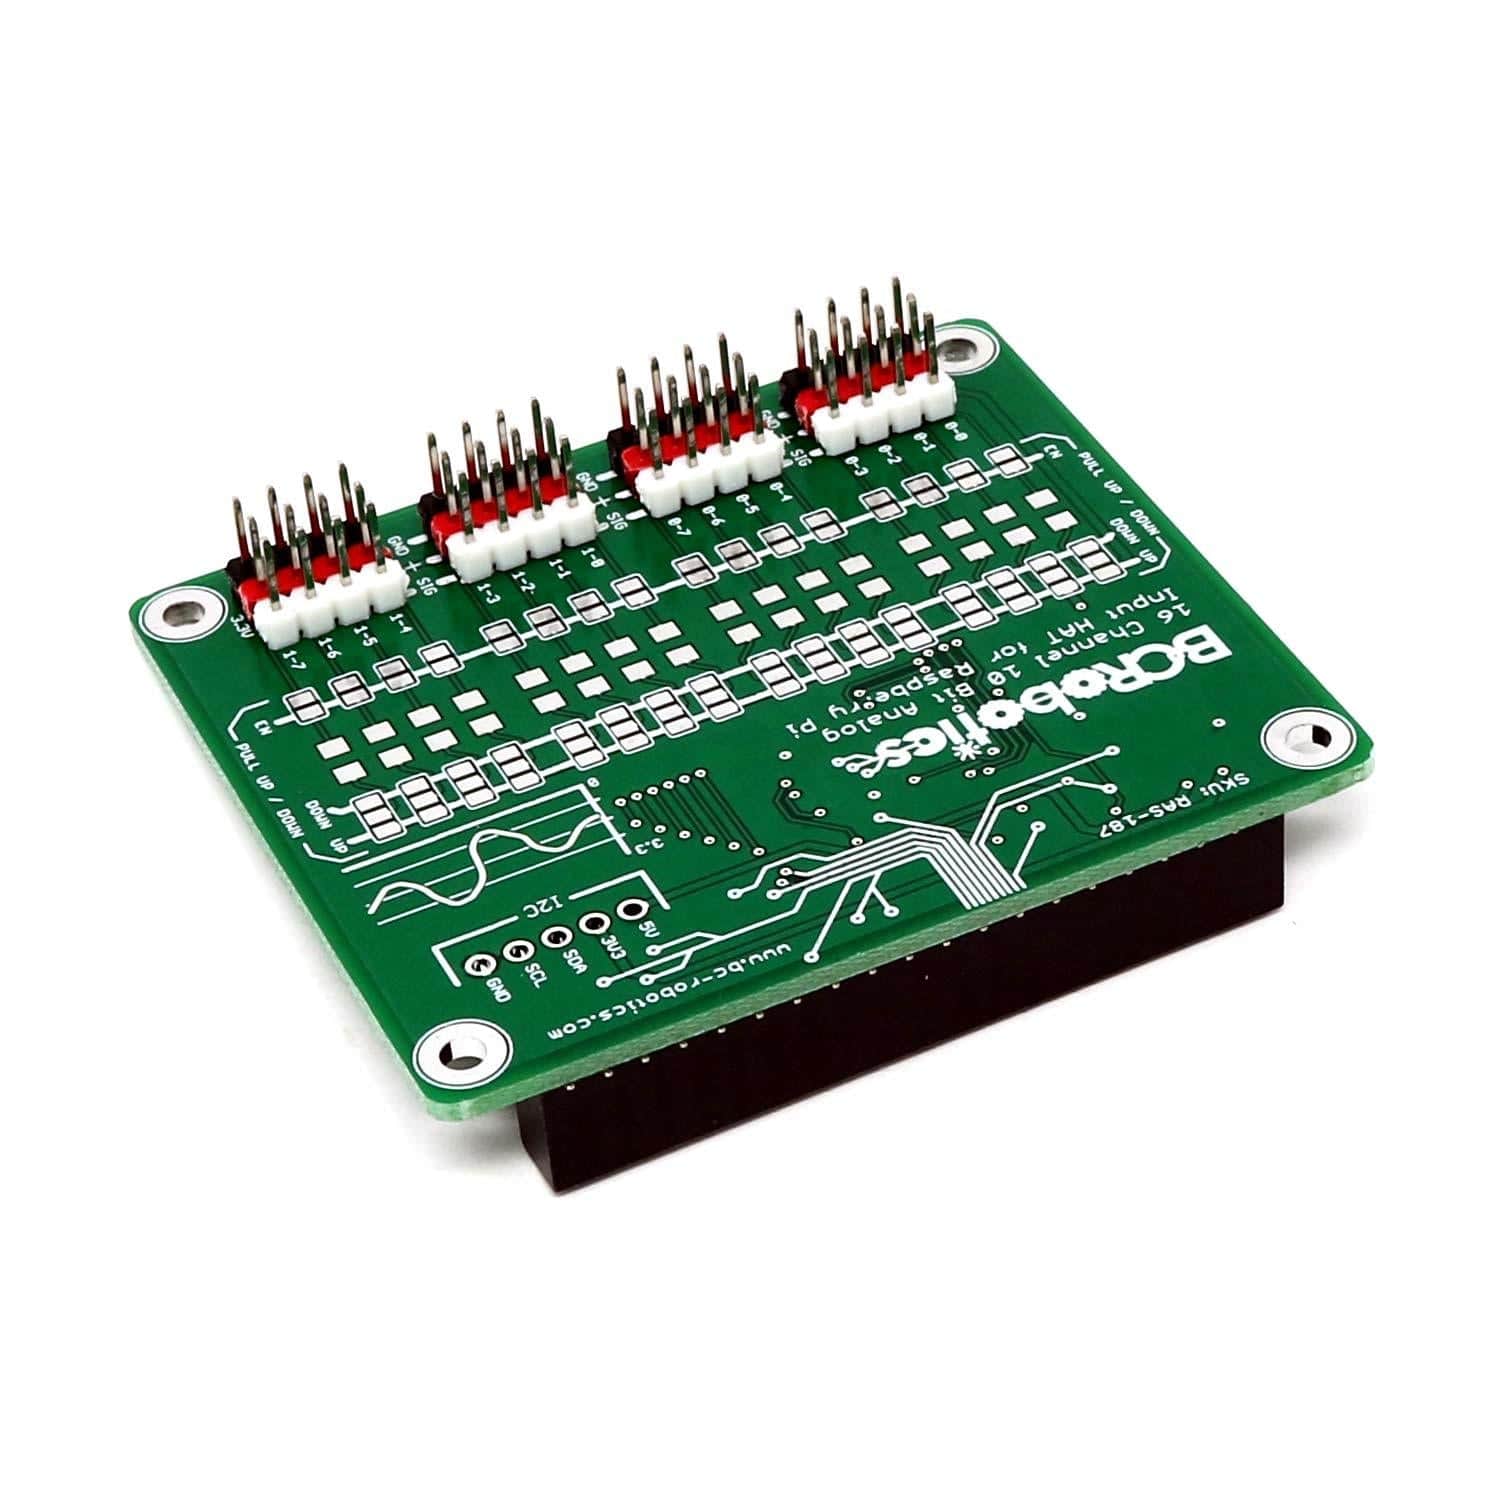 16 Channel Analog Input HAT – ADC for Raspberry Pi - The Pi Hut